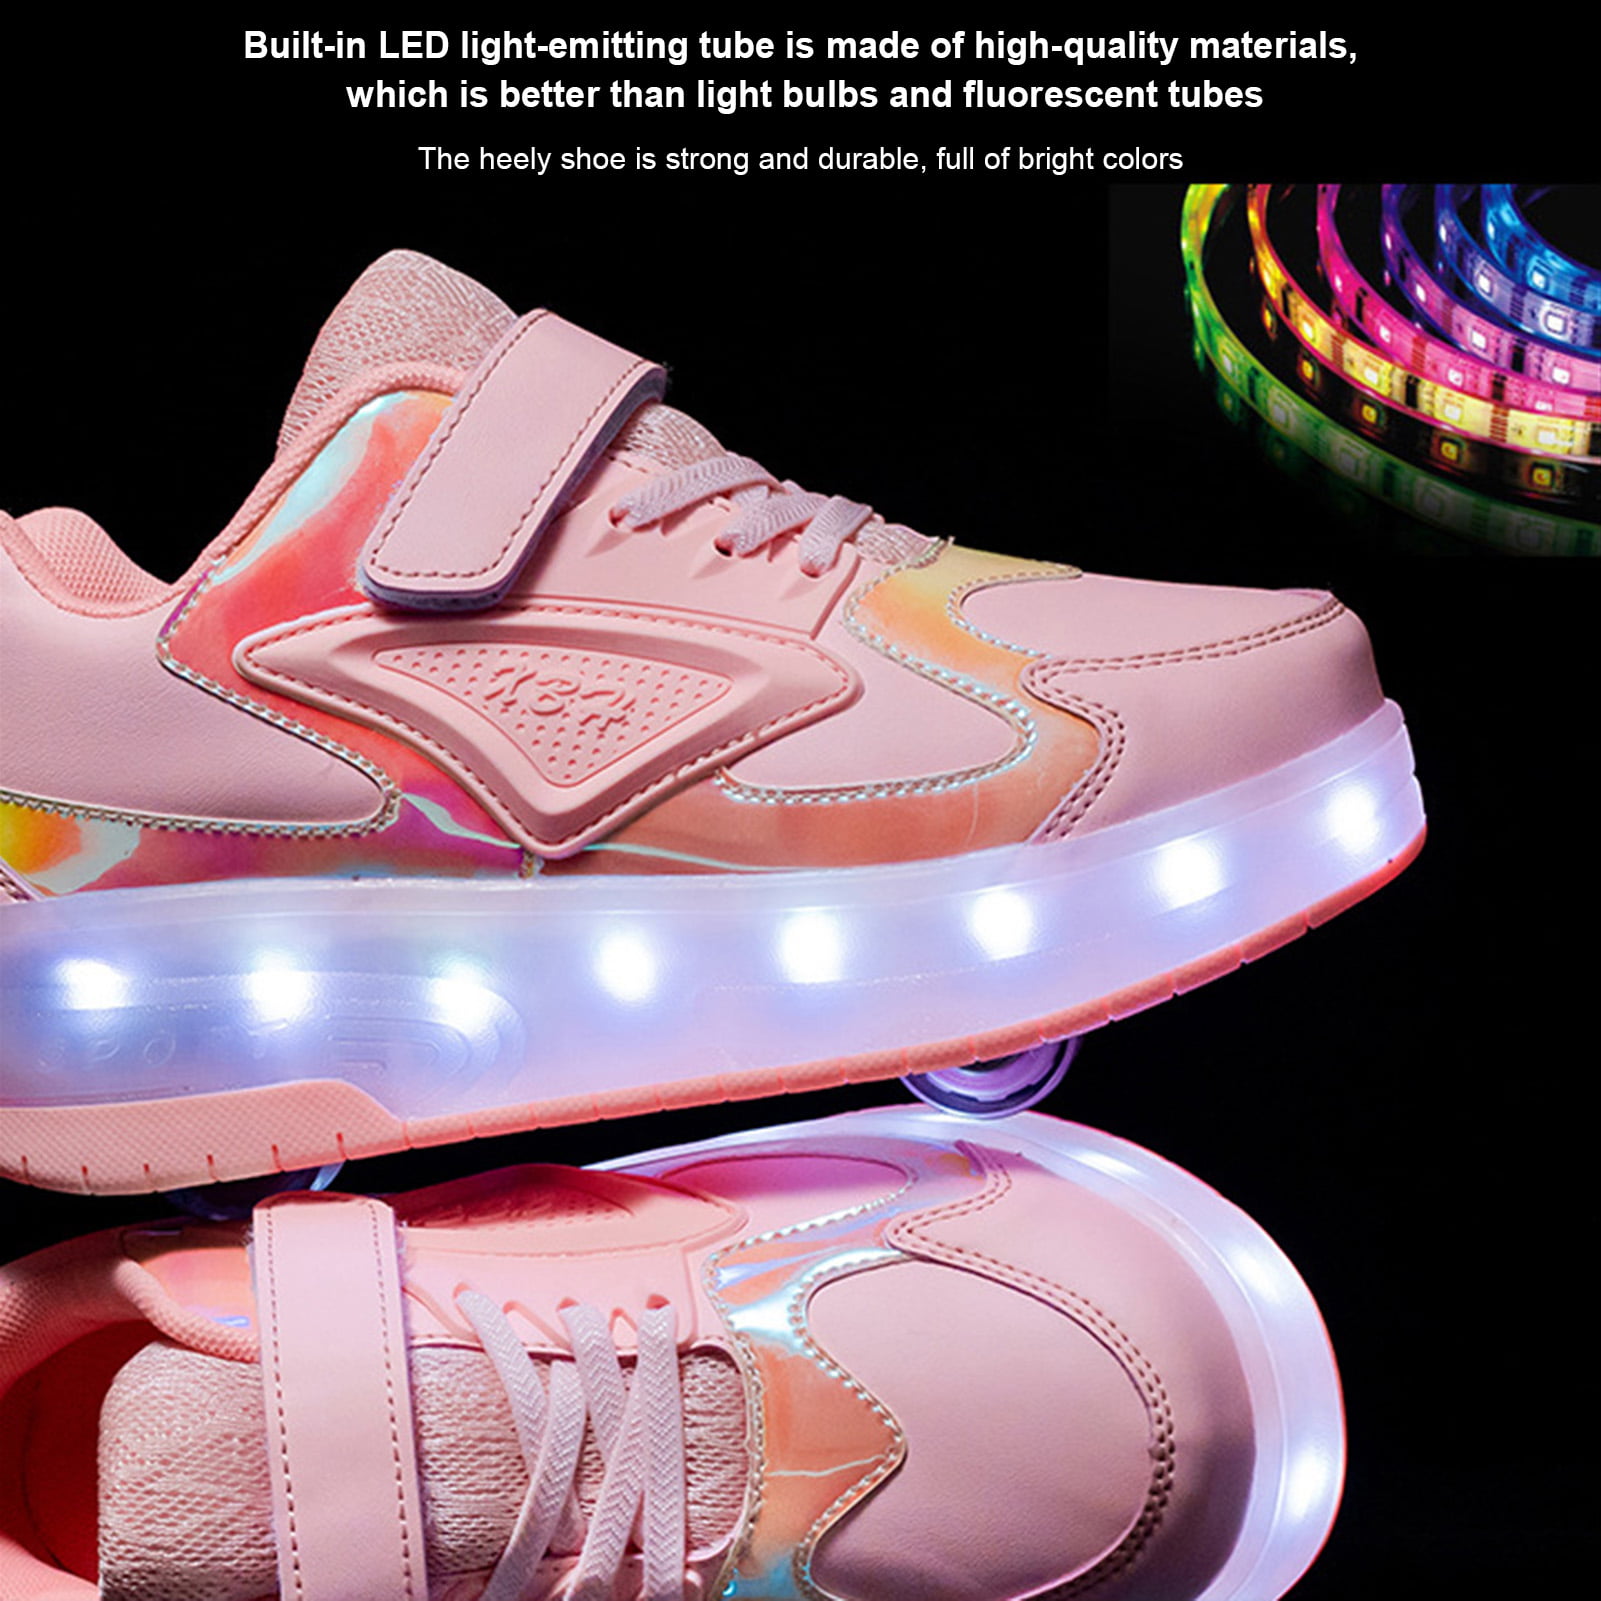 Lucky Kids Boys Girls LED Roller Skate Shoes Double Wheels Flashing Luminous Skates Outdoor Gymnastics Fashion Sneaker Technical Skateboarding Shoes with USB Charging 